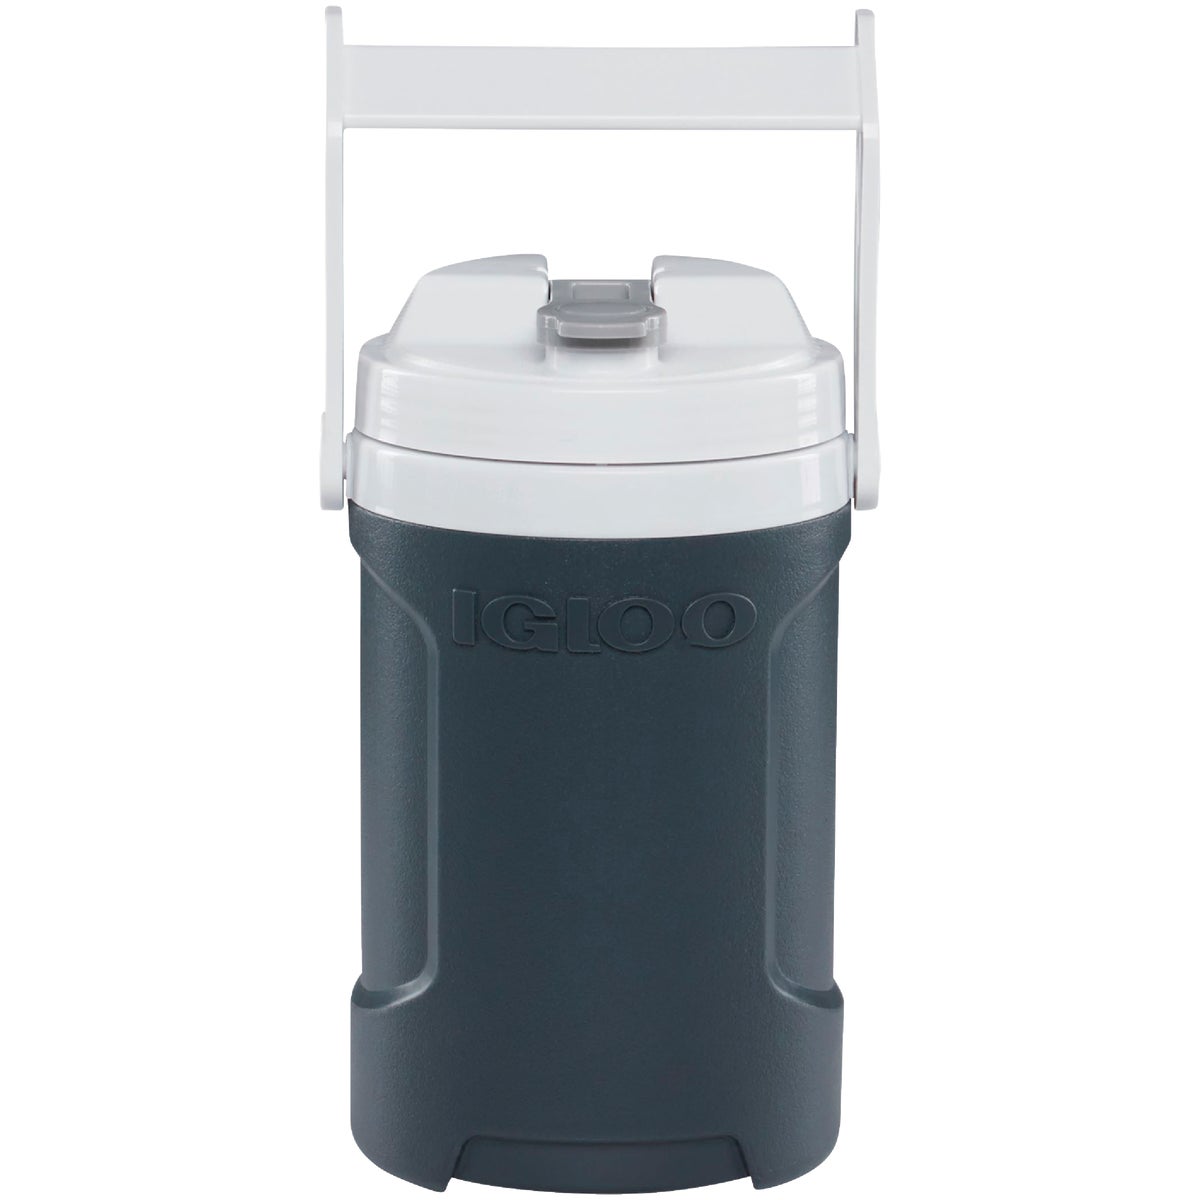 Item 801646, Fully insulated beverage cooler keeps drinks cold the entire game or event